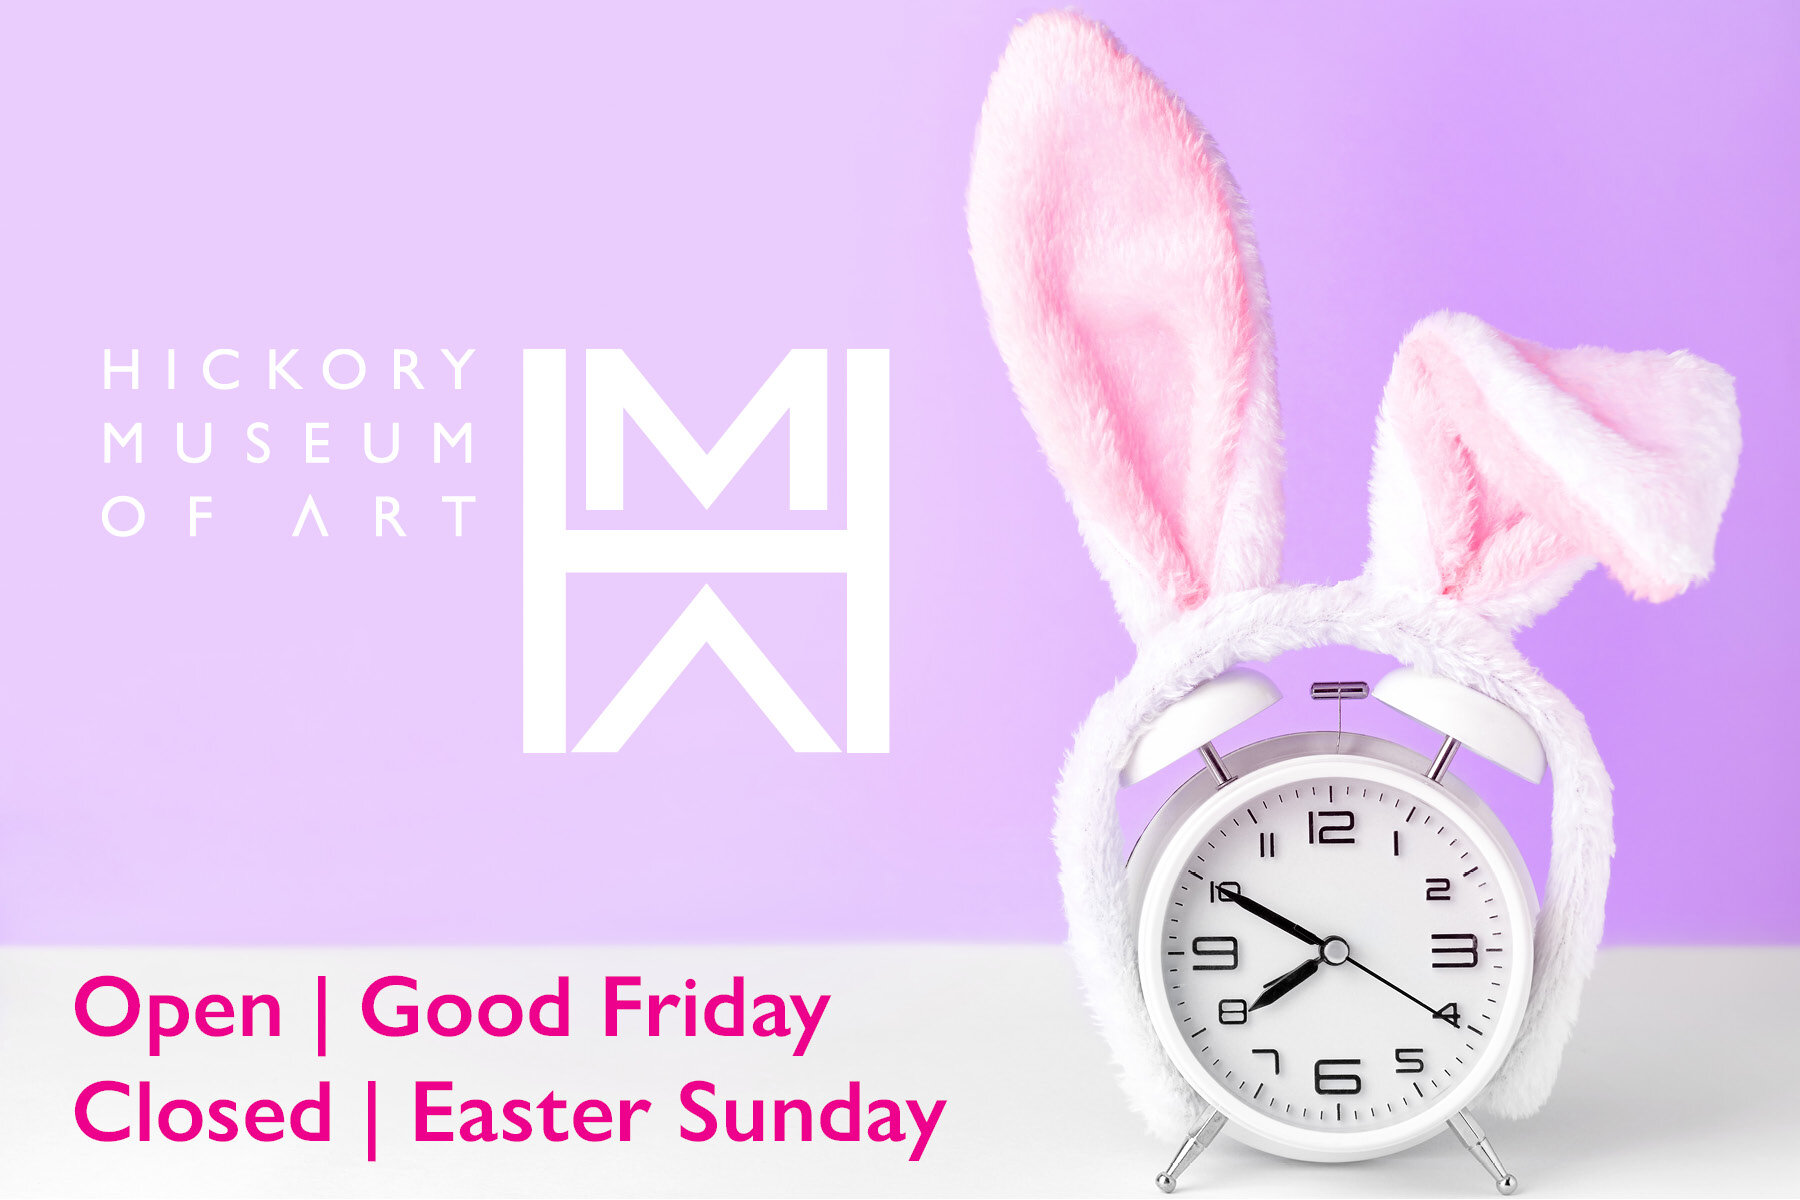 Hickory Museum of Art will be open to visitors on Good Friday, March 29. We will be closed on Easter Sunday, March 31 so our staff can have time to enjoy the holiday with friends and family.

#hma #hickoryart #hickoryartmuseum